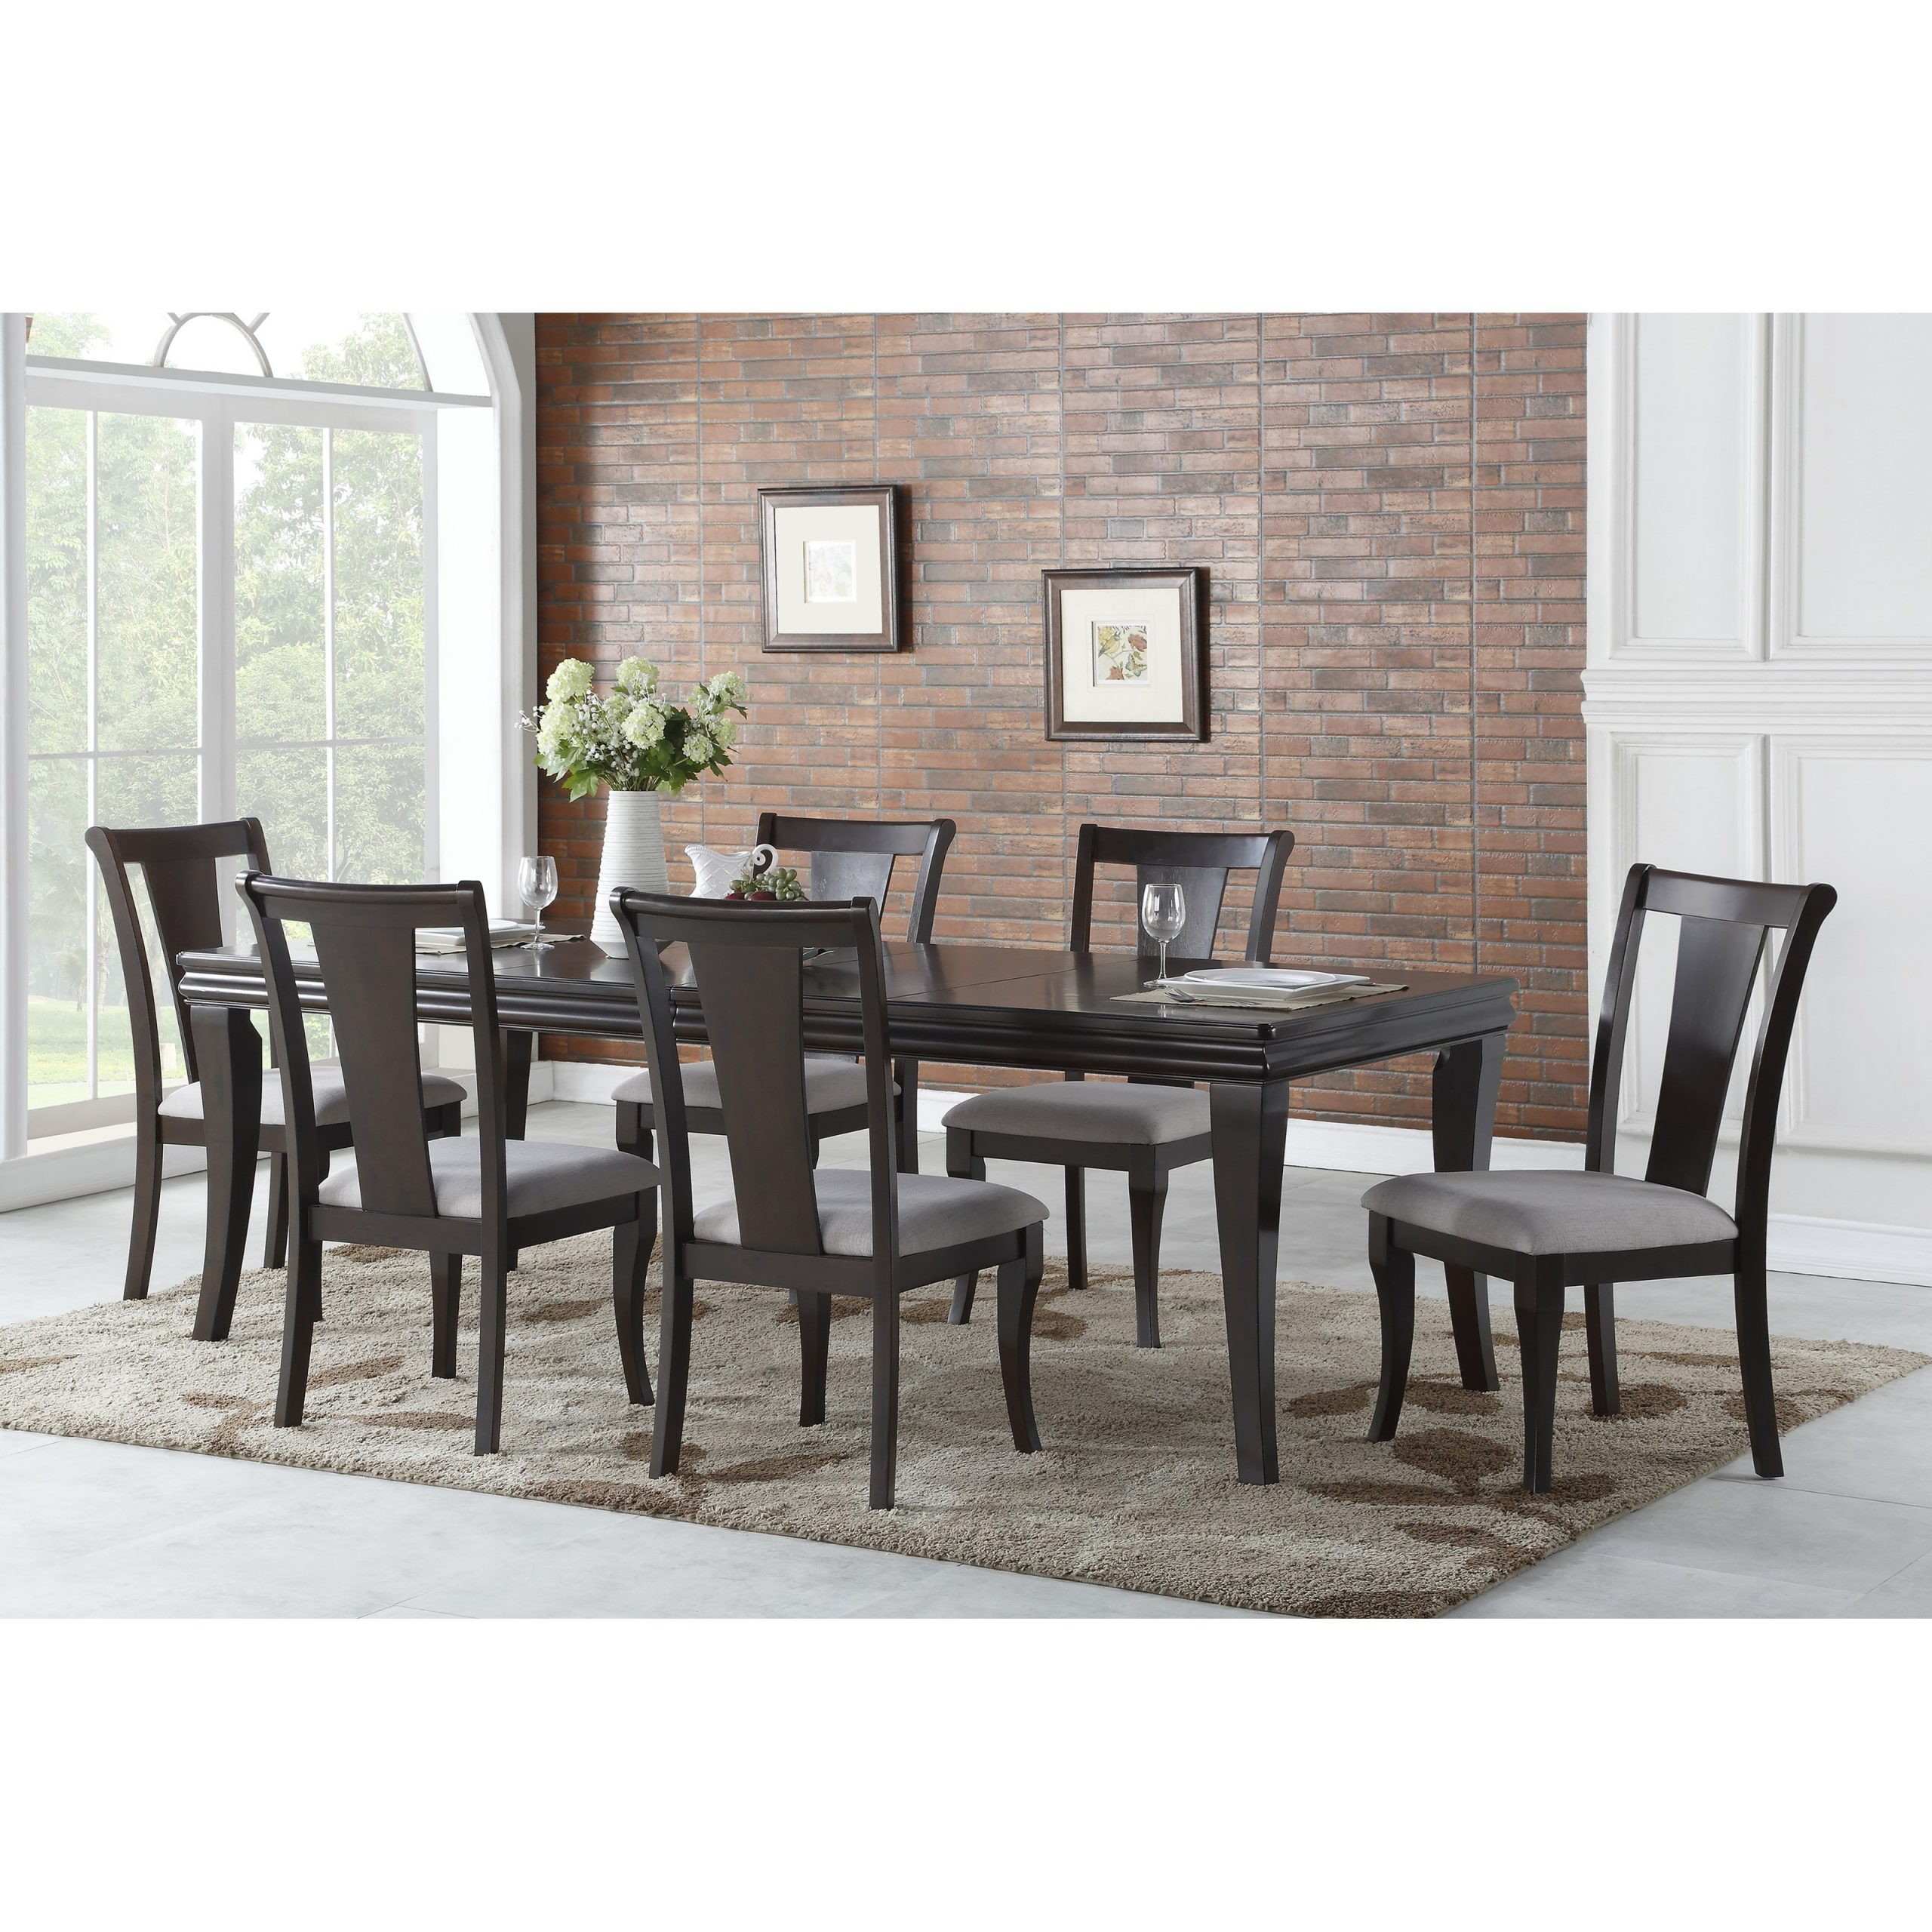 Steve Silver Aubrey Transitional Dining Room Set Northeast throughout dimensions 3200 X 3200